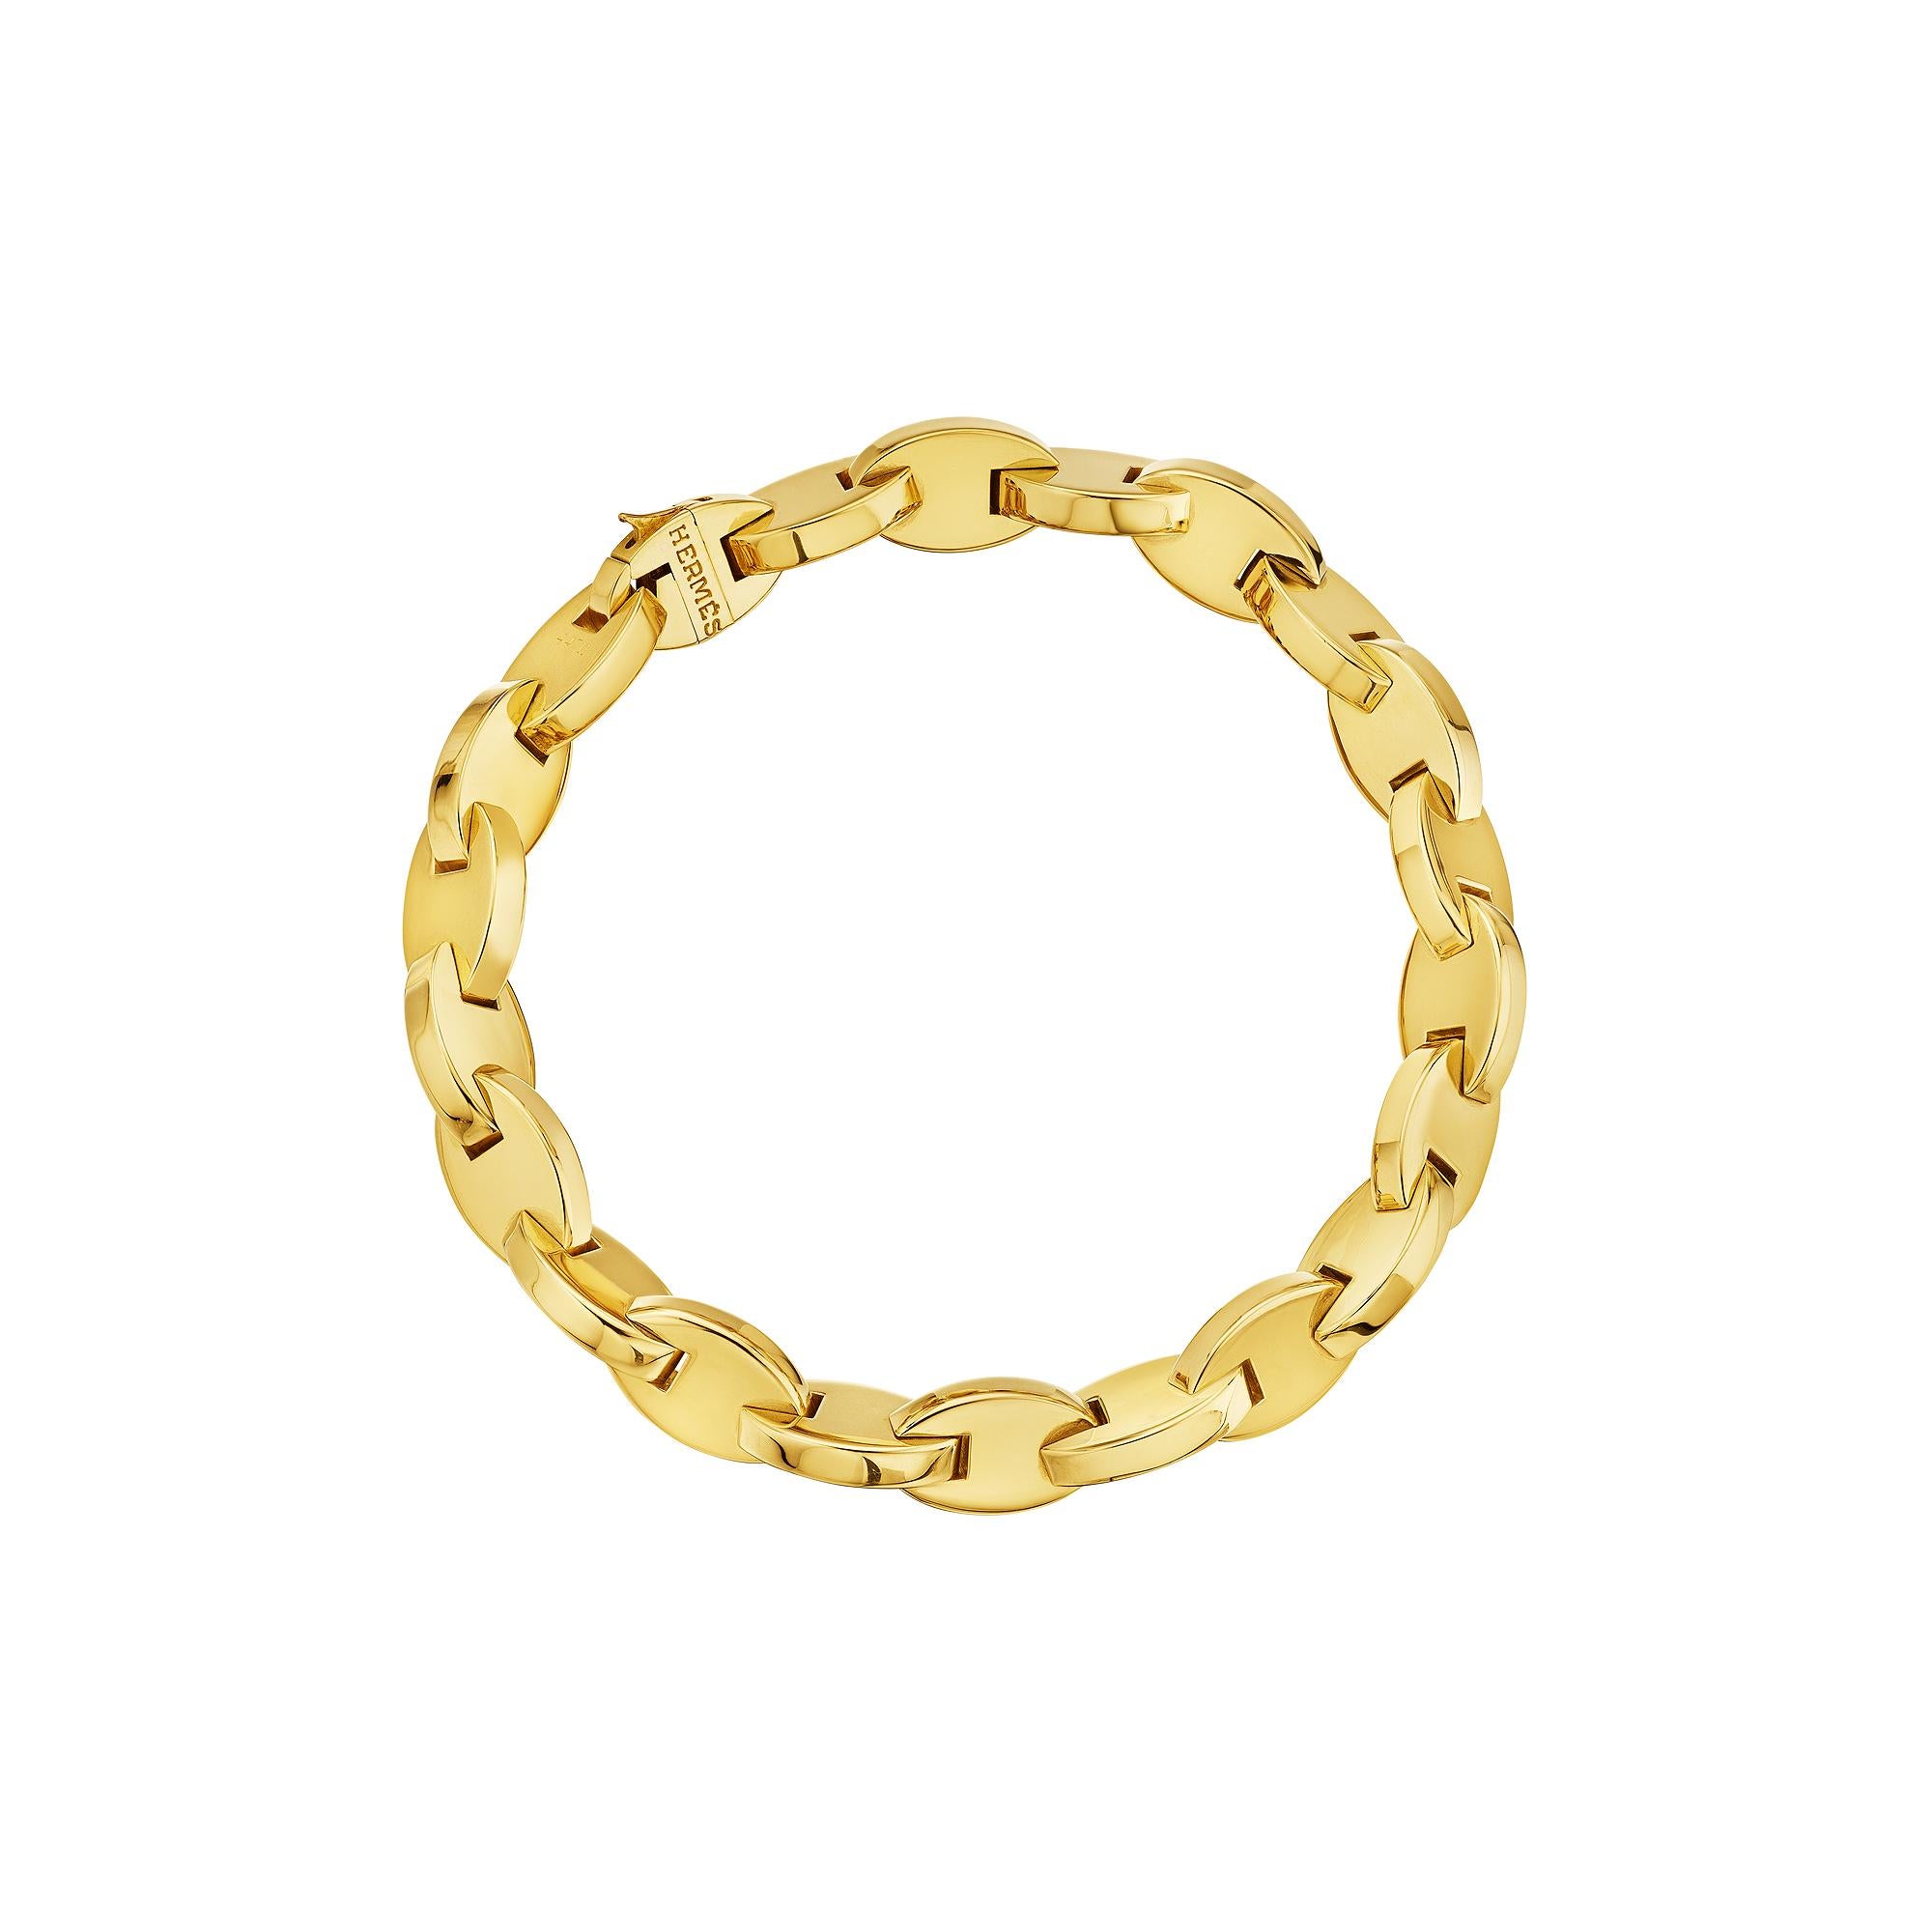 Hermes Paris modernist sleek oval link 18 karat yellow gold bracelet strongly stands alone or stacked with others but is always perfect worn everyday and everywhere.  Signed Hermes with serial number 44711.  Circa 1980-90.  7 1/2